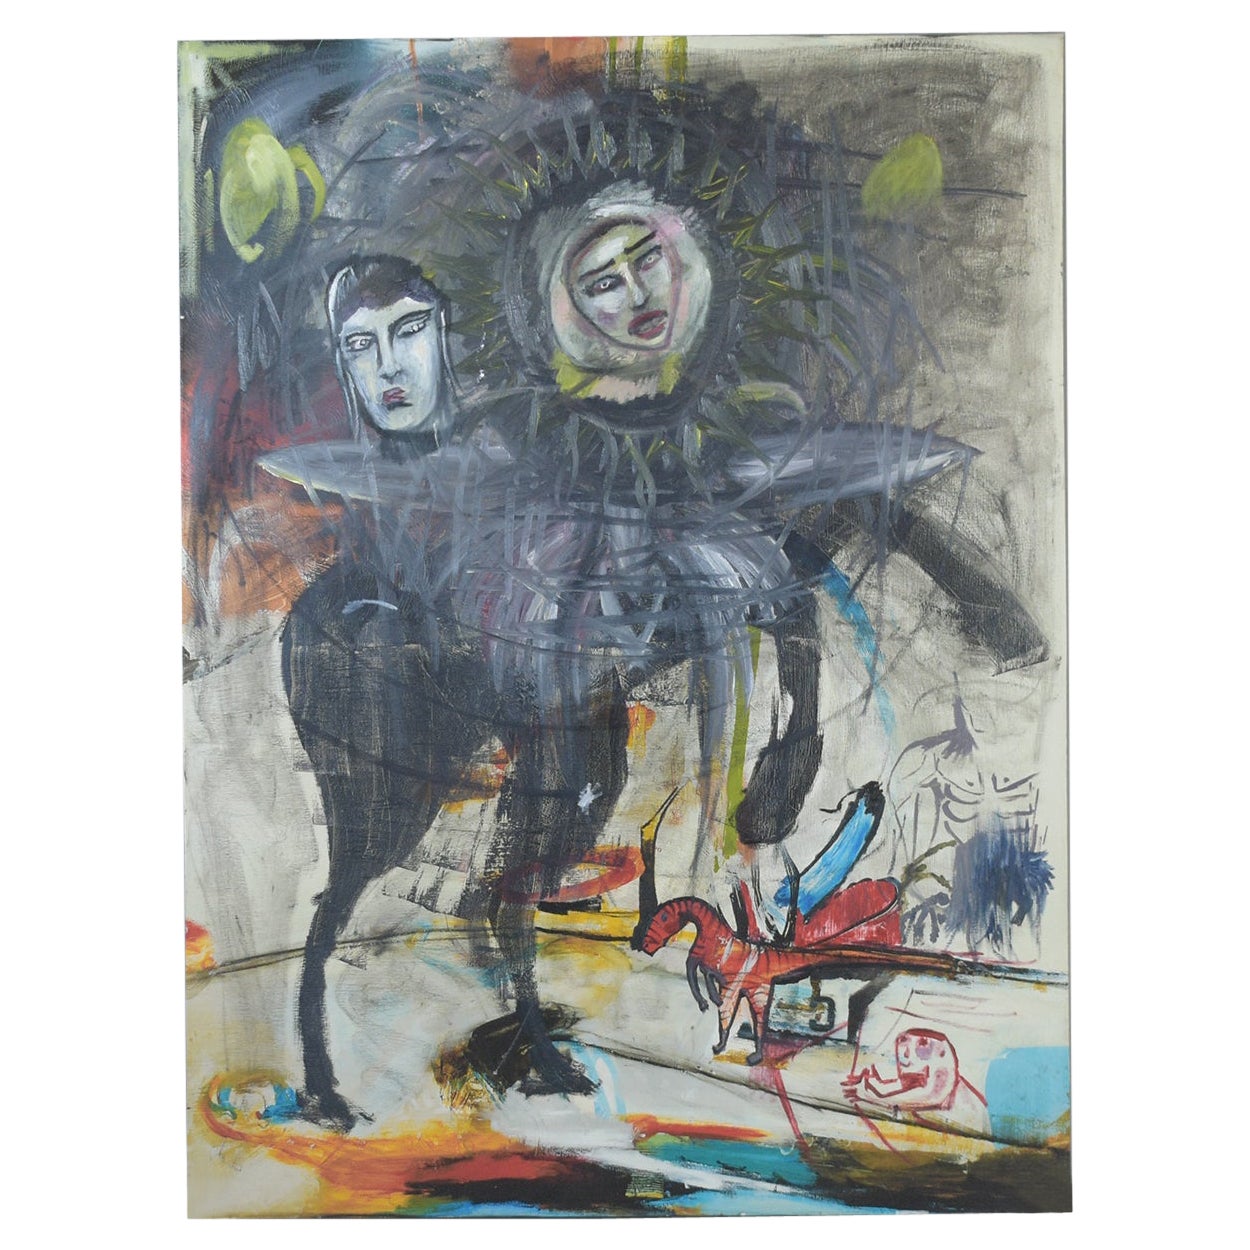 Unique Two-Headed Horse Abstract Expressionist Painting For Sale